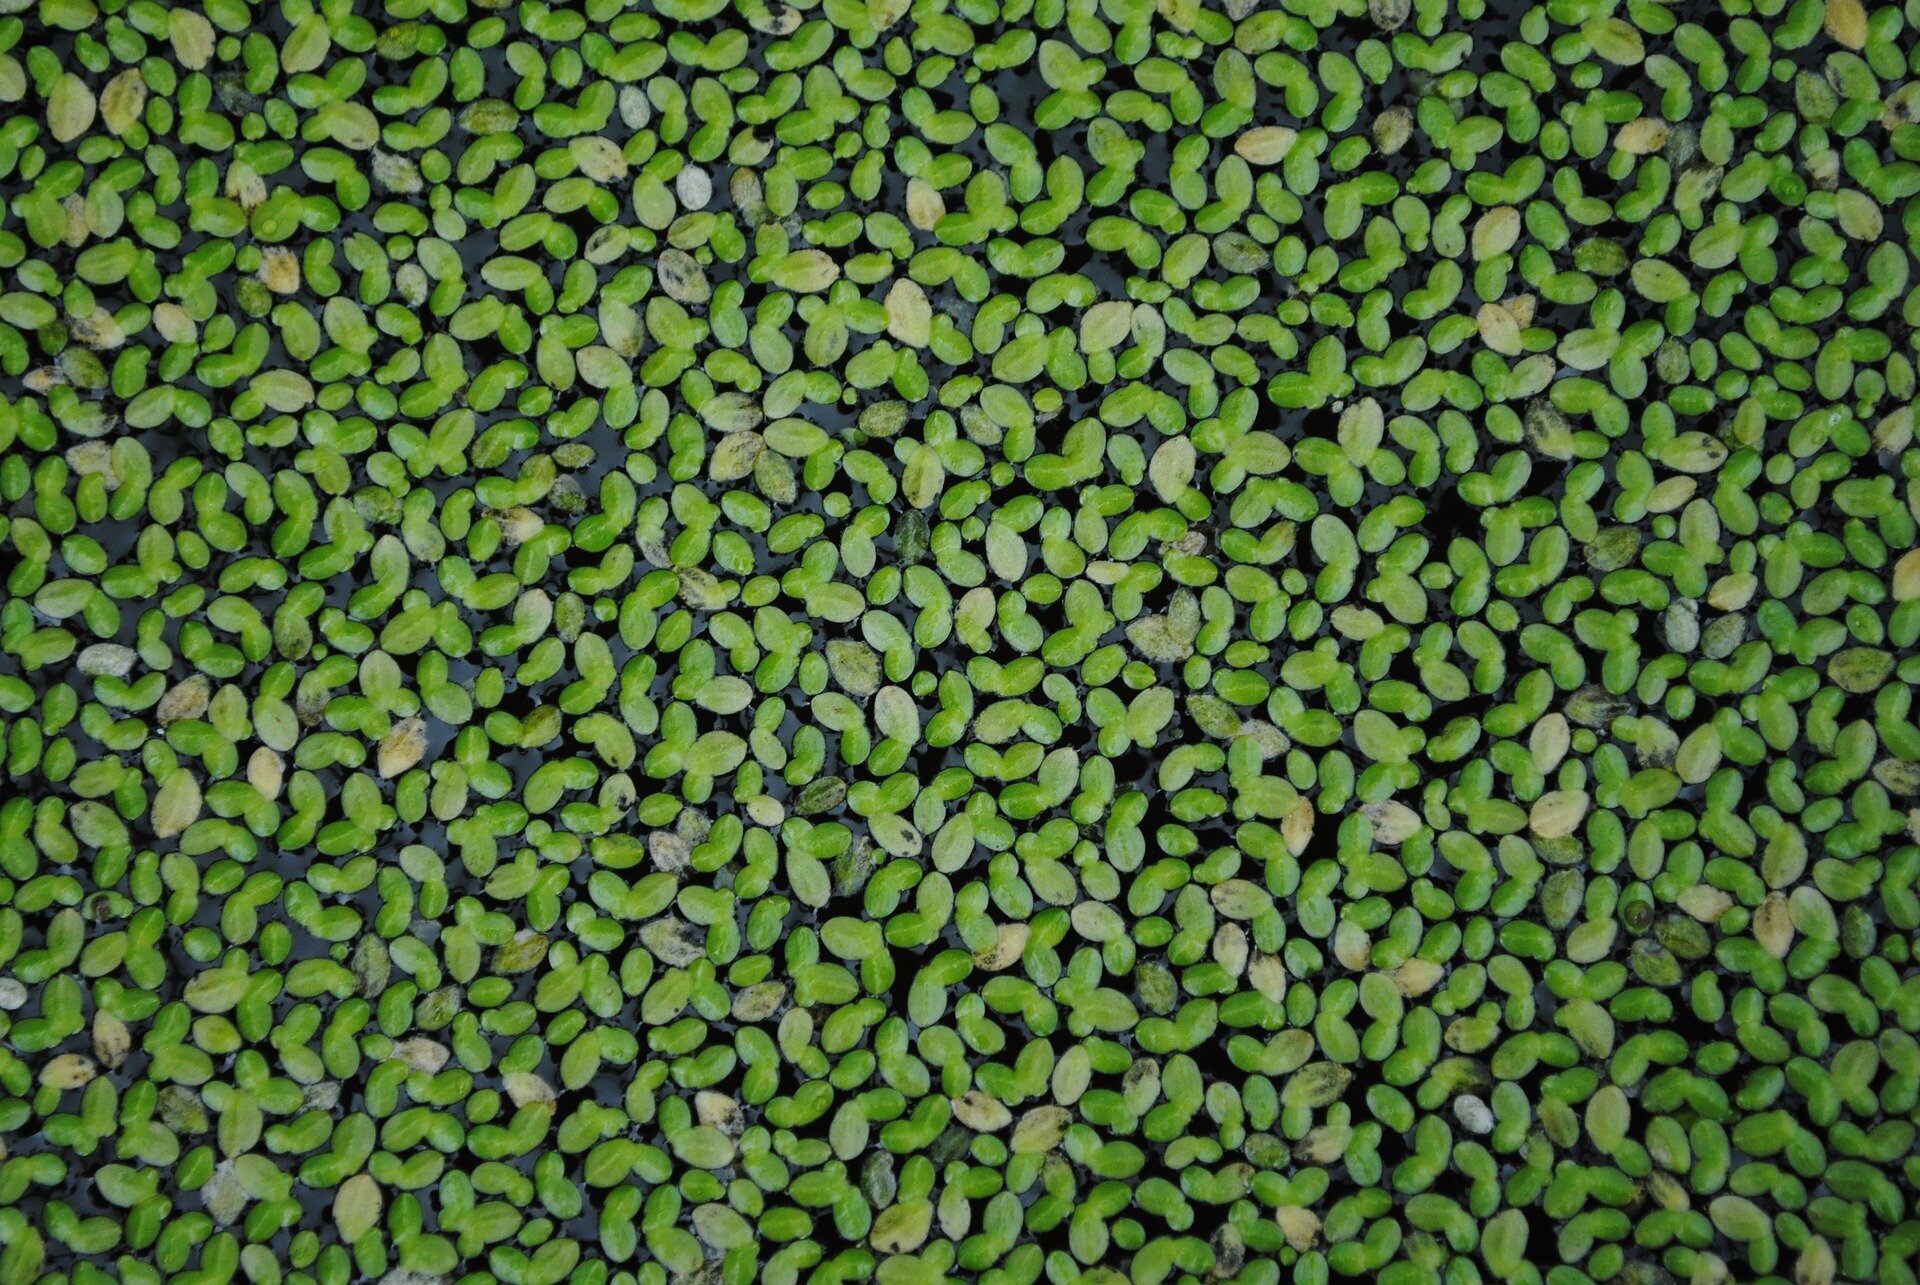 New research reveals: Floating plants excel at wastewater purification